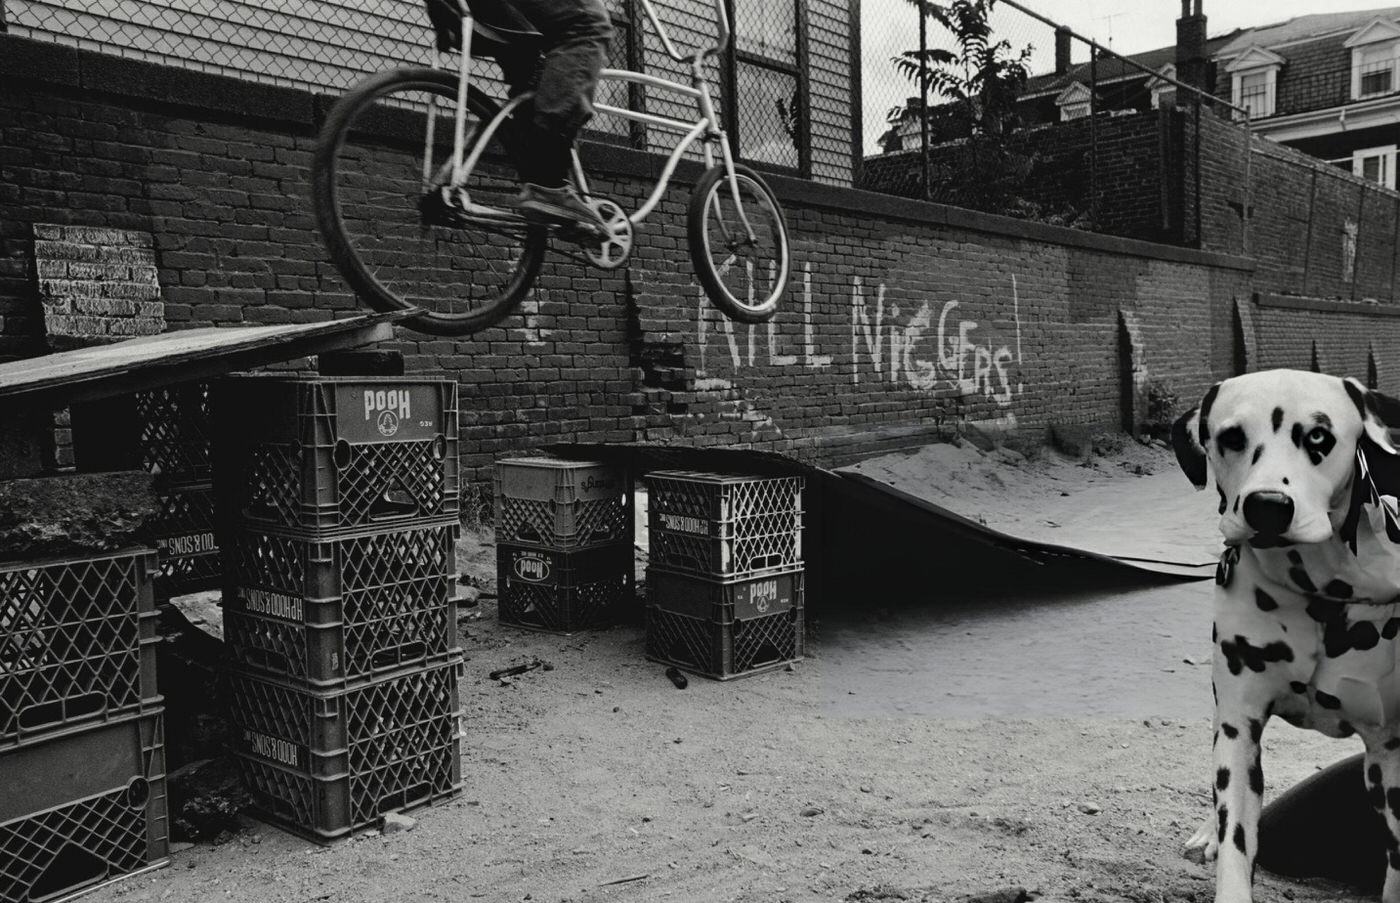 A dalmatian in an alley with a child riding a bicycle in the background, South Boston, 1975.